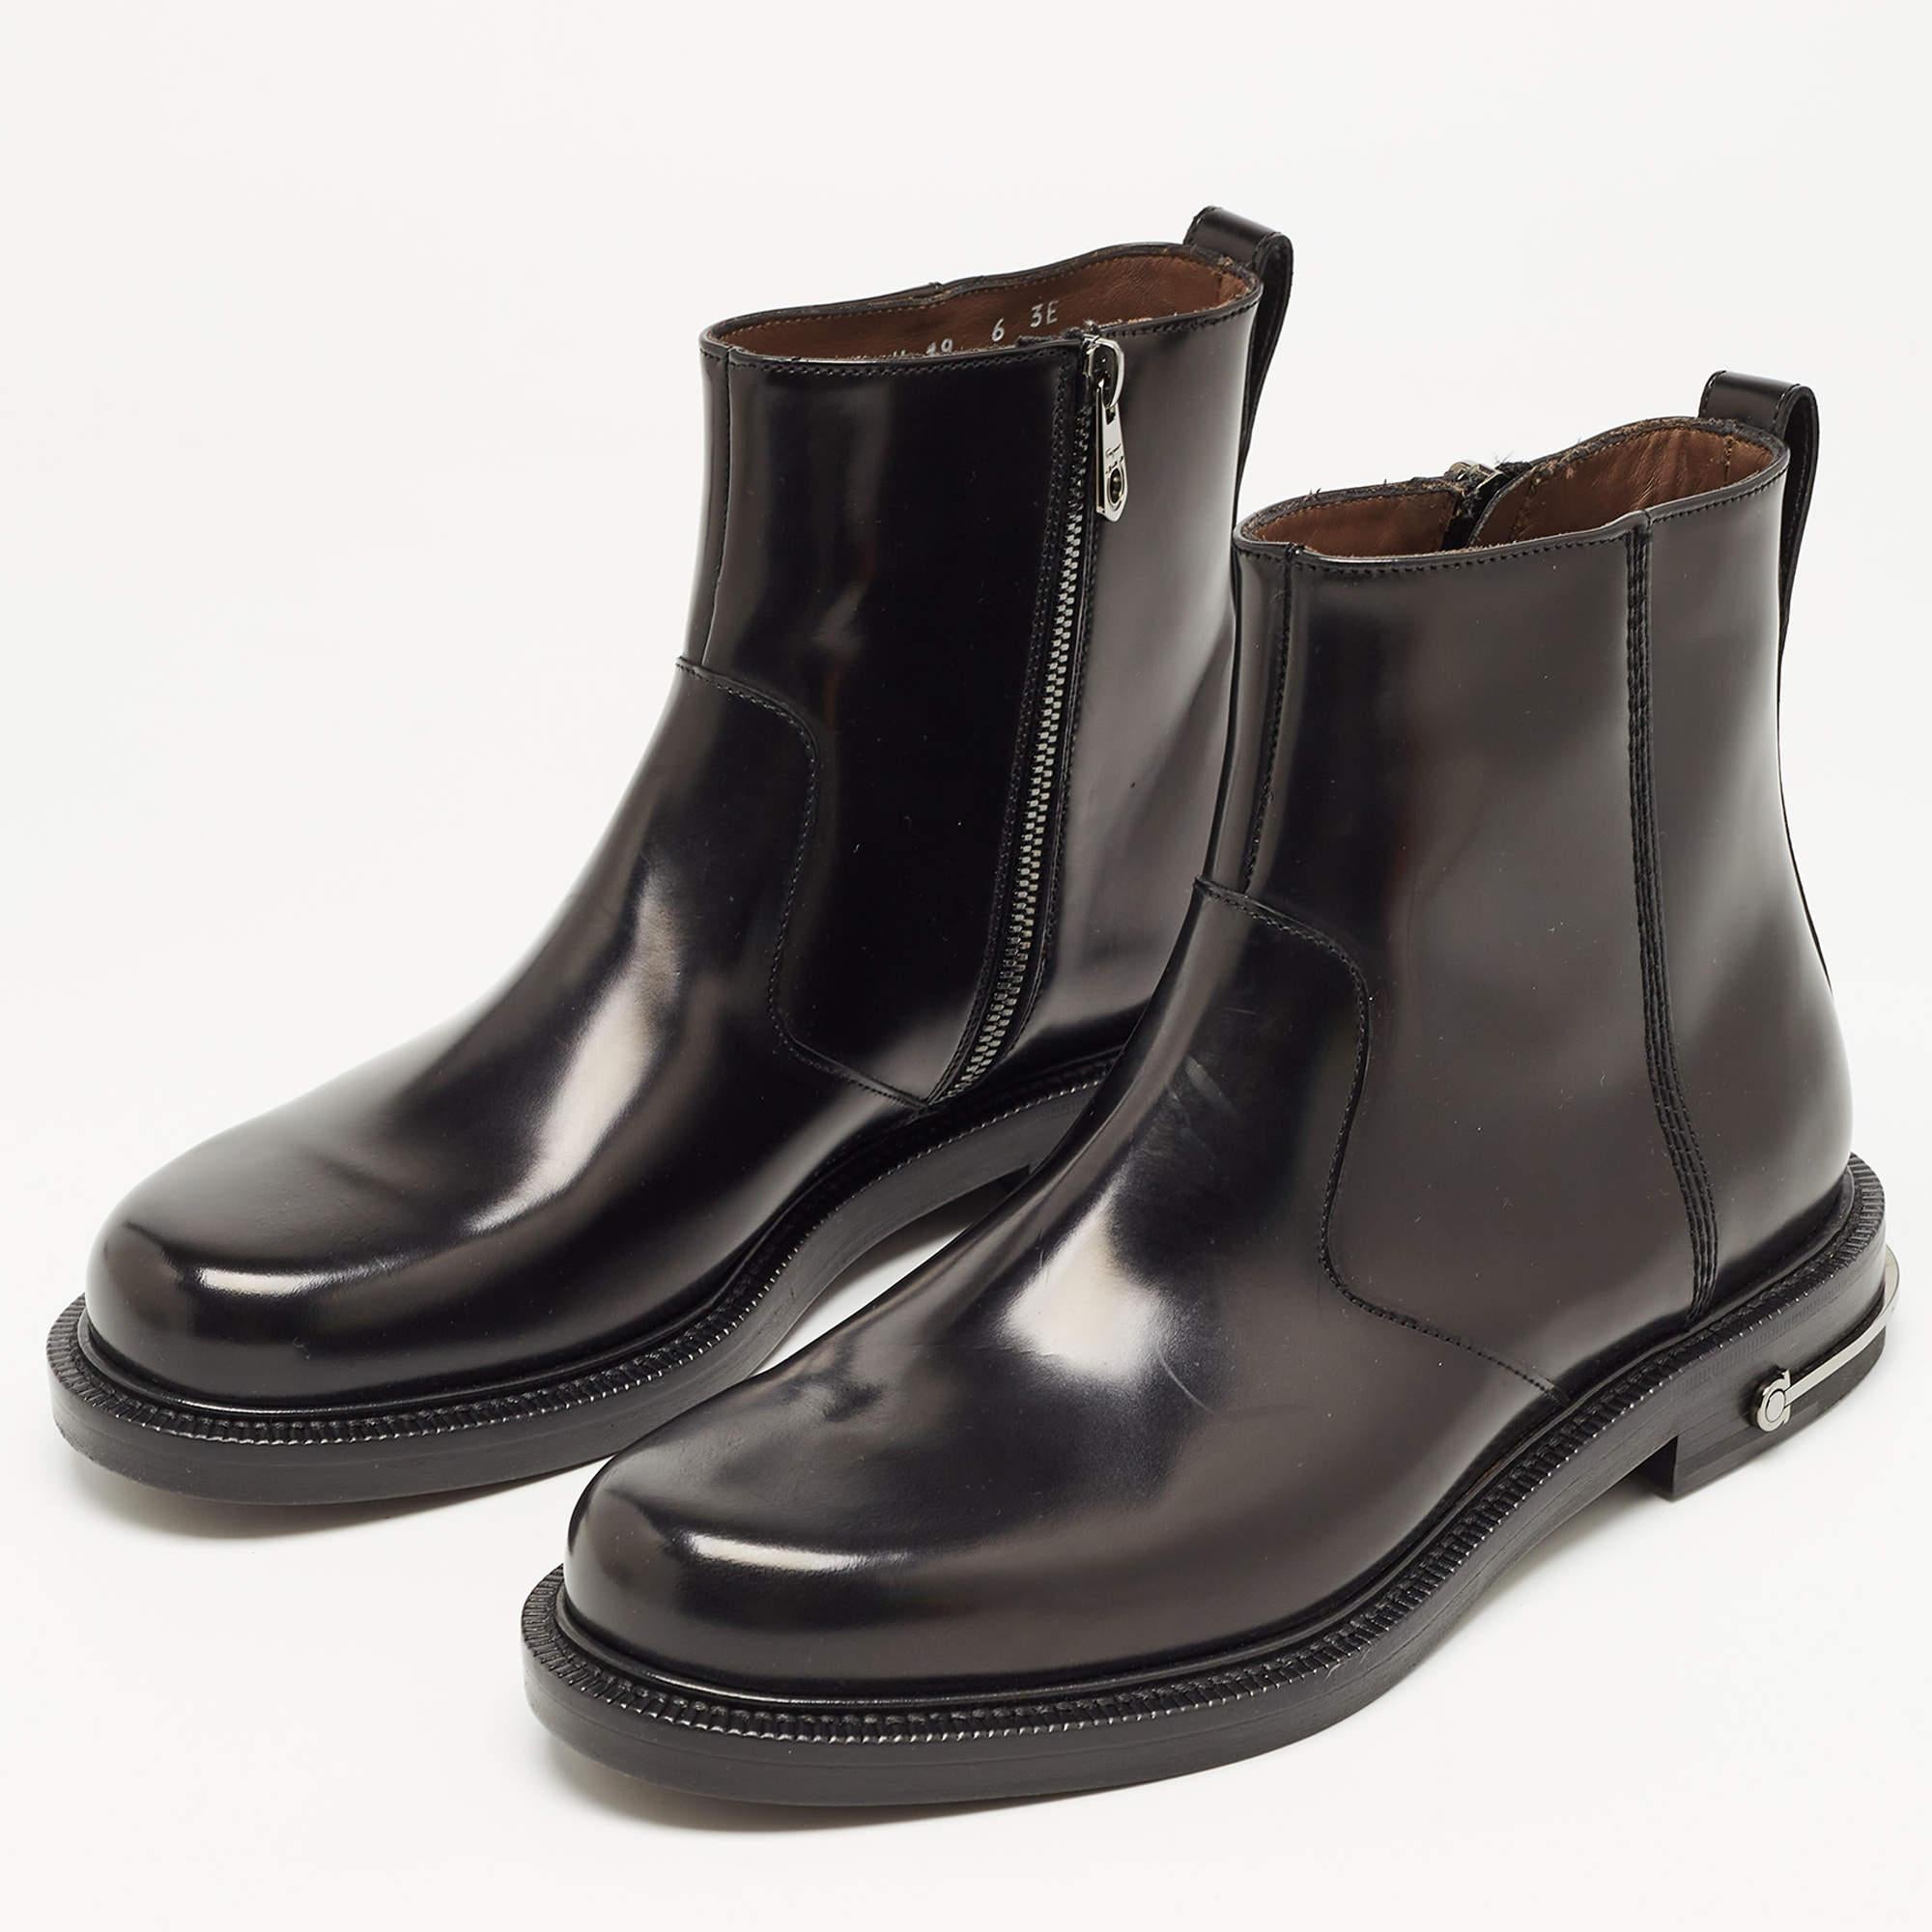 Boots are an essential part of your wardrobe, and these boots, crafted from top-quality materials, are a fine choice. Offering the best of comfort and style, this sturdy-soled pair would be great with skinny jeans for a casual day out!

